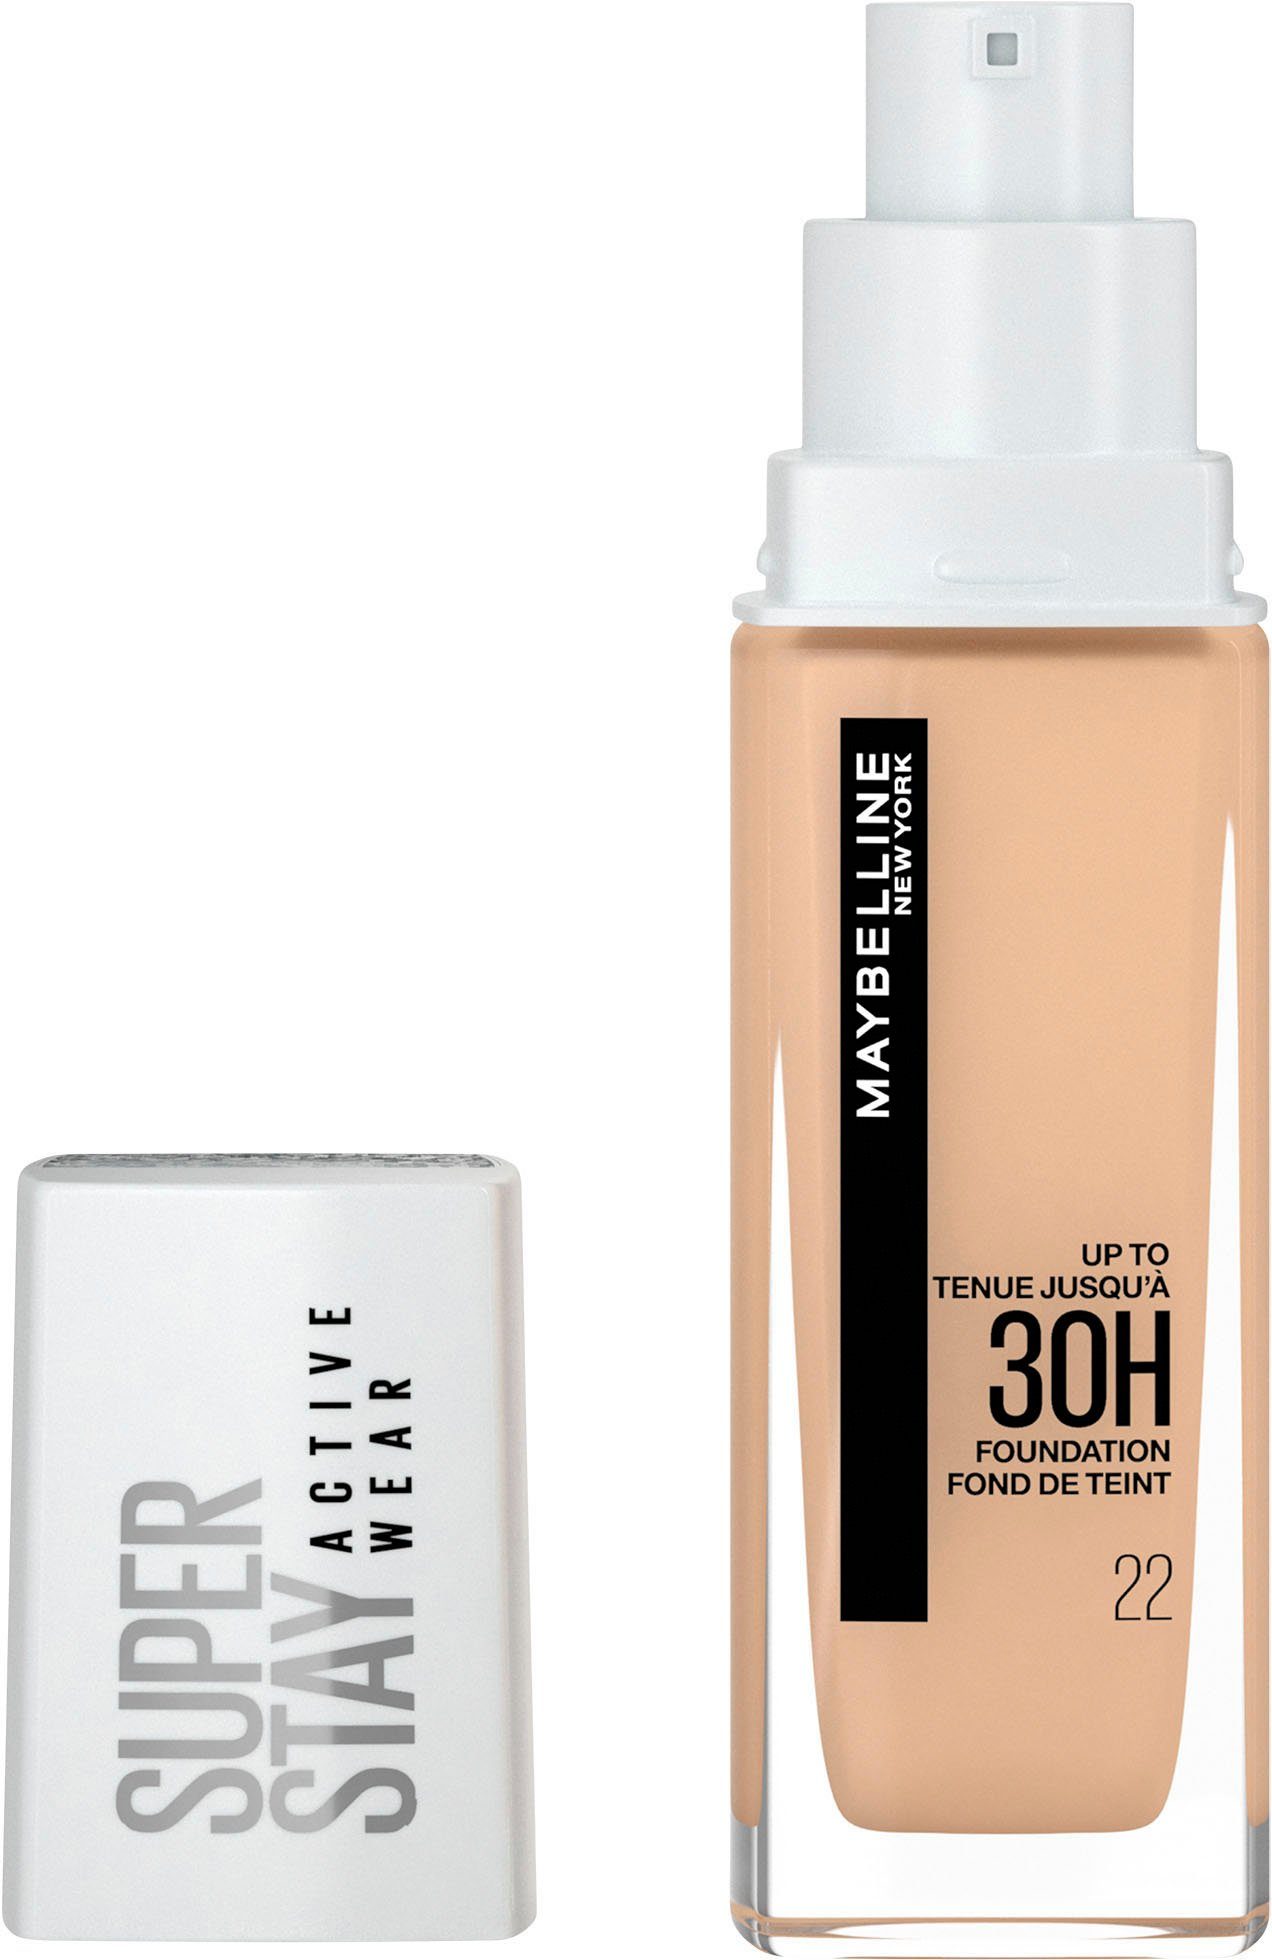 MAYBELLINE NEW YORK Foundation Super Active Bisque 22 Light Wear Stay